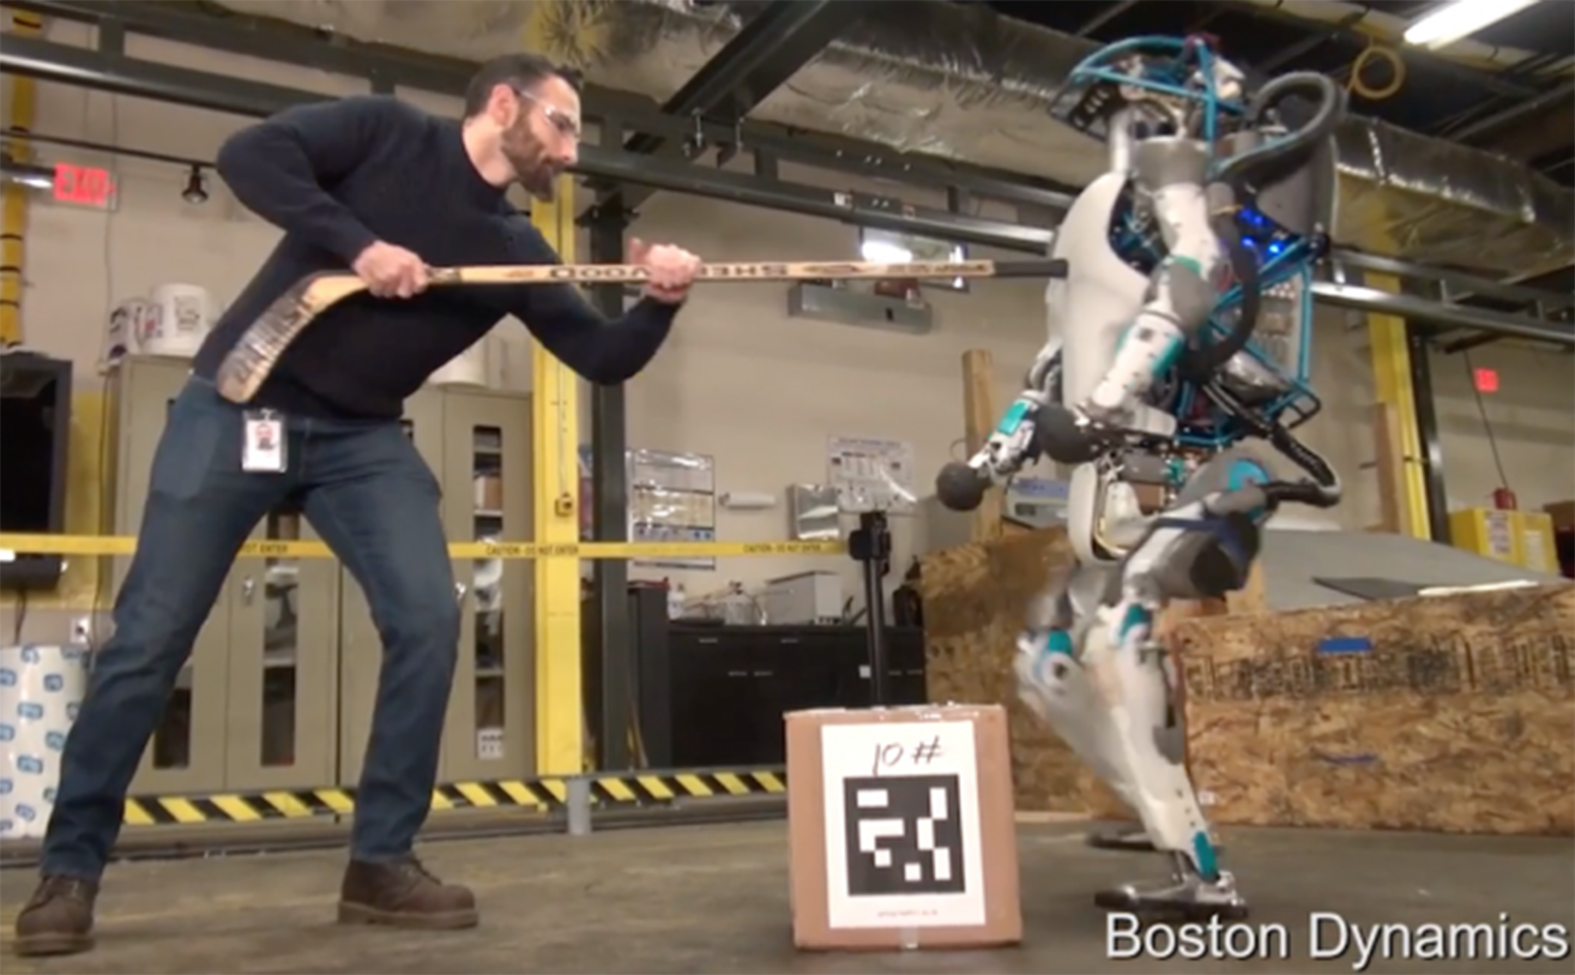 An engineer prods the robot, Atlas, with a hockey stick